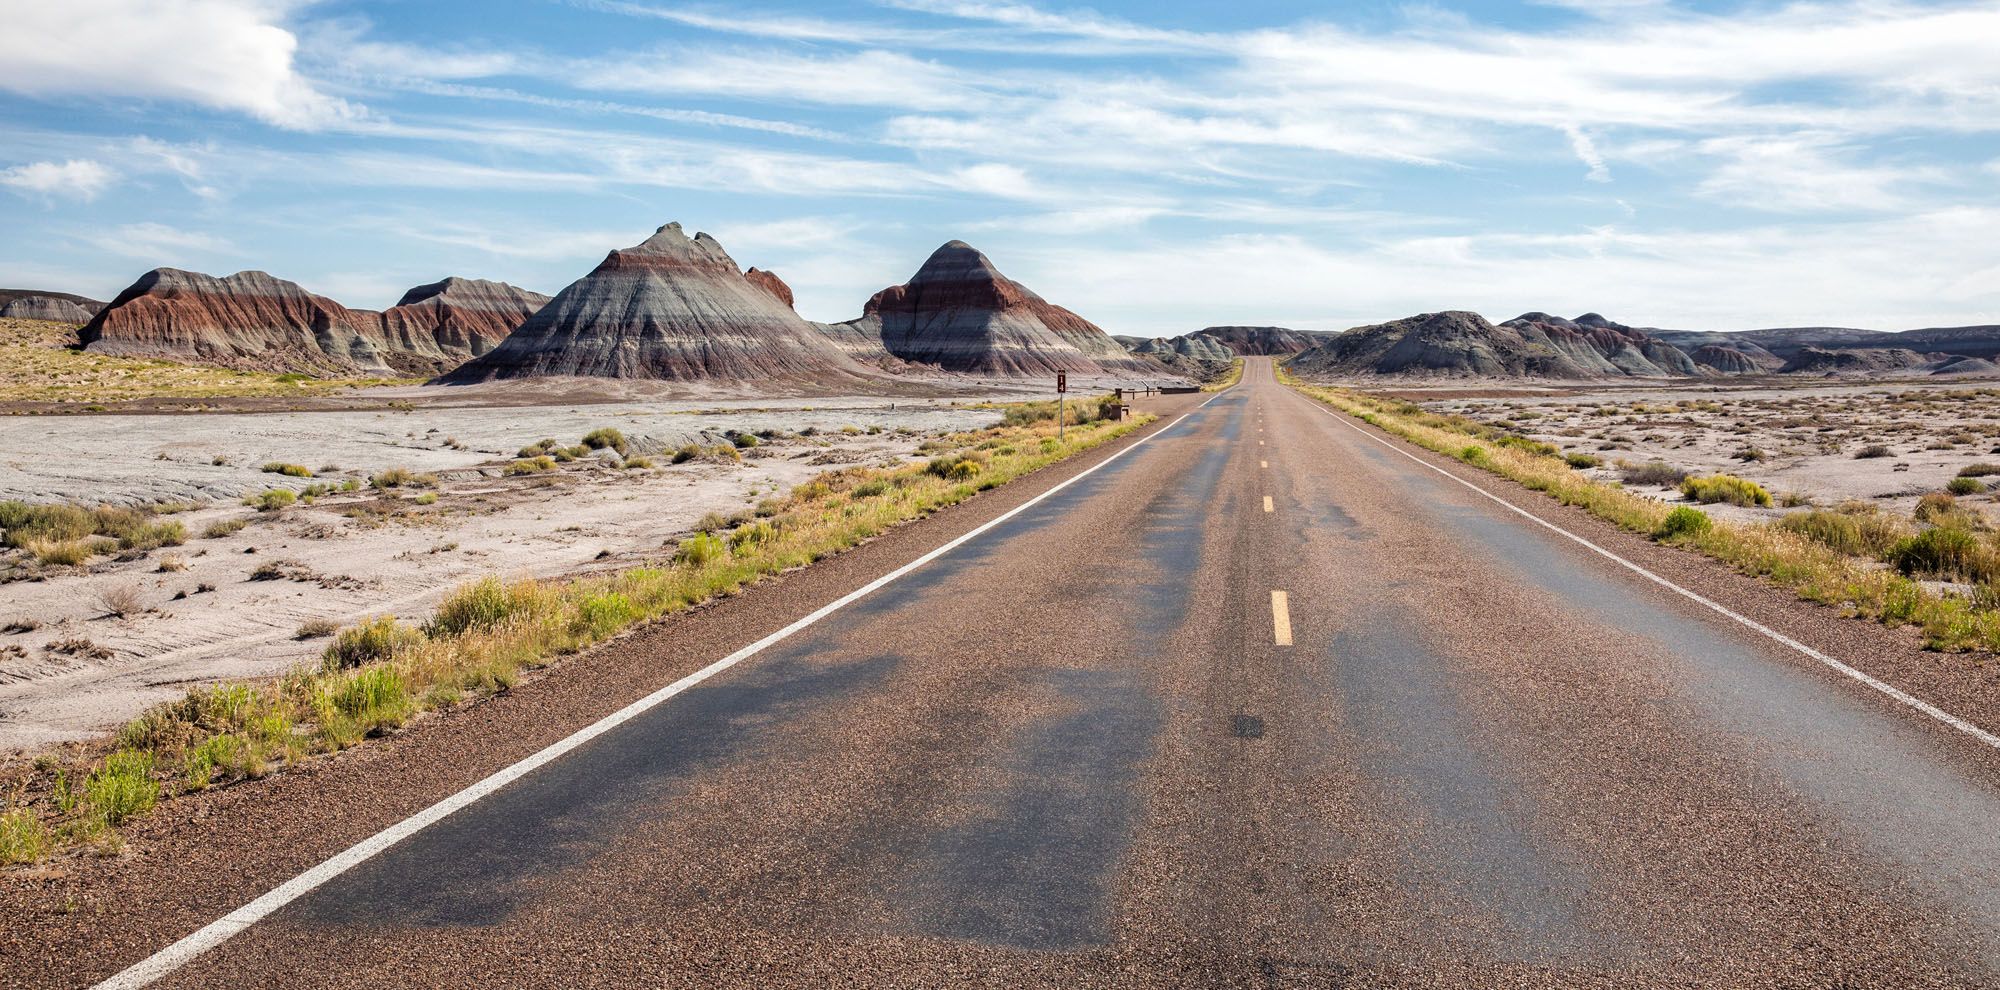 Featured image for “Petrified Forest National Park: Travel Guide & Itinerary”